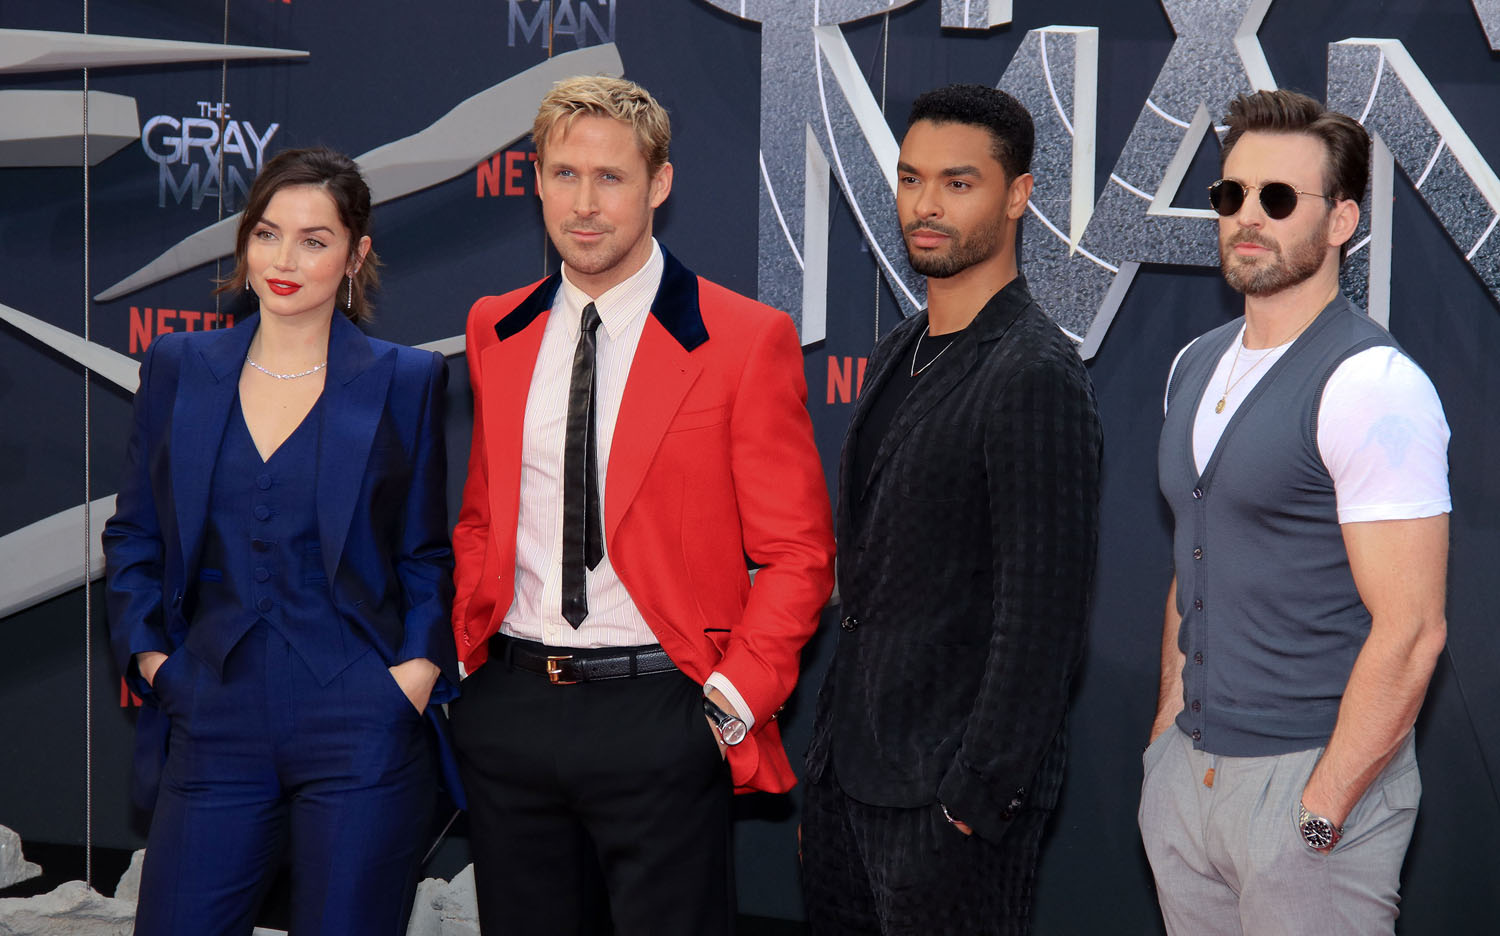 None of the Men at 'The Gray Man' Premiere Wore Gray